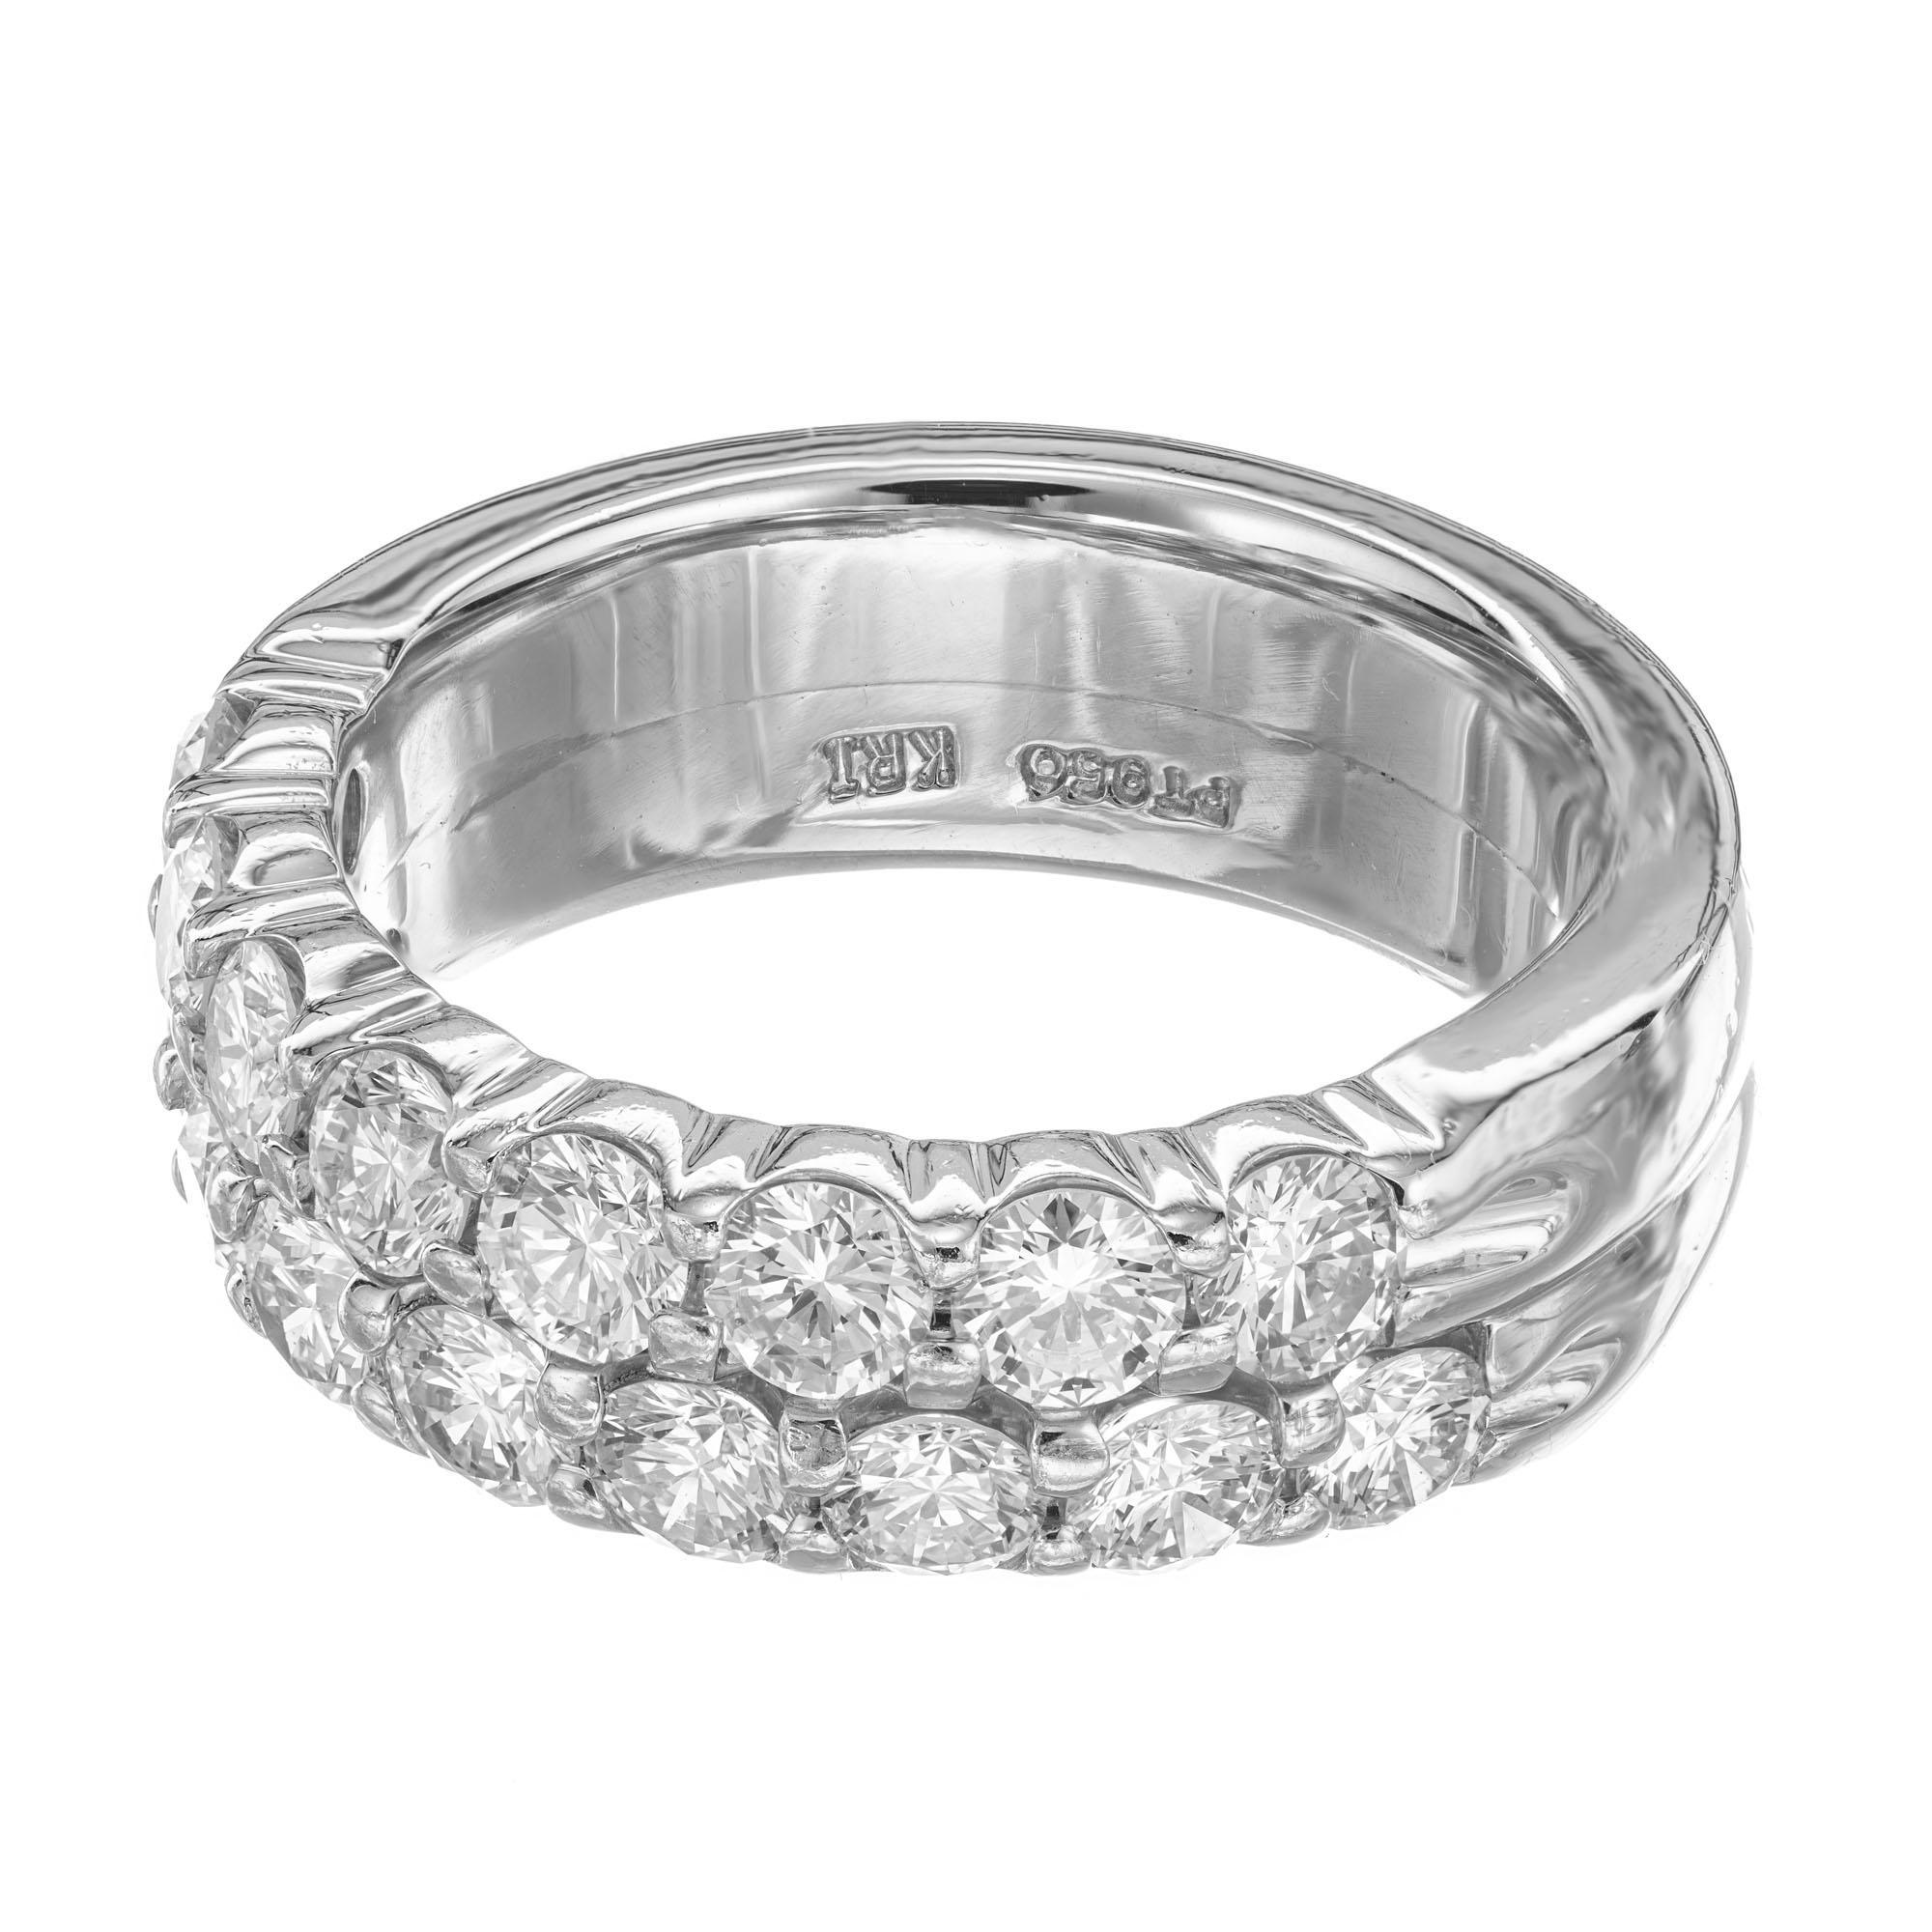 Diamond two row wedding band. 1.70 carats of round diamonds in a platinum band setting. 

17 round diamonds approx. total weight 1.70cts, F, VS
Size: 5.5 and sizable
Platinum
Weight: 14.2 grams
Top to bottom: 6.17mm or .24 inches